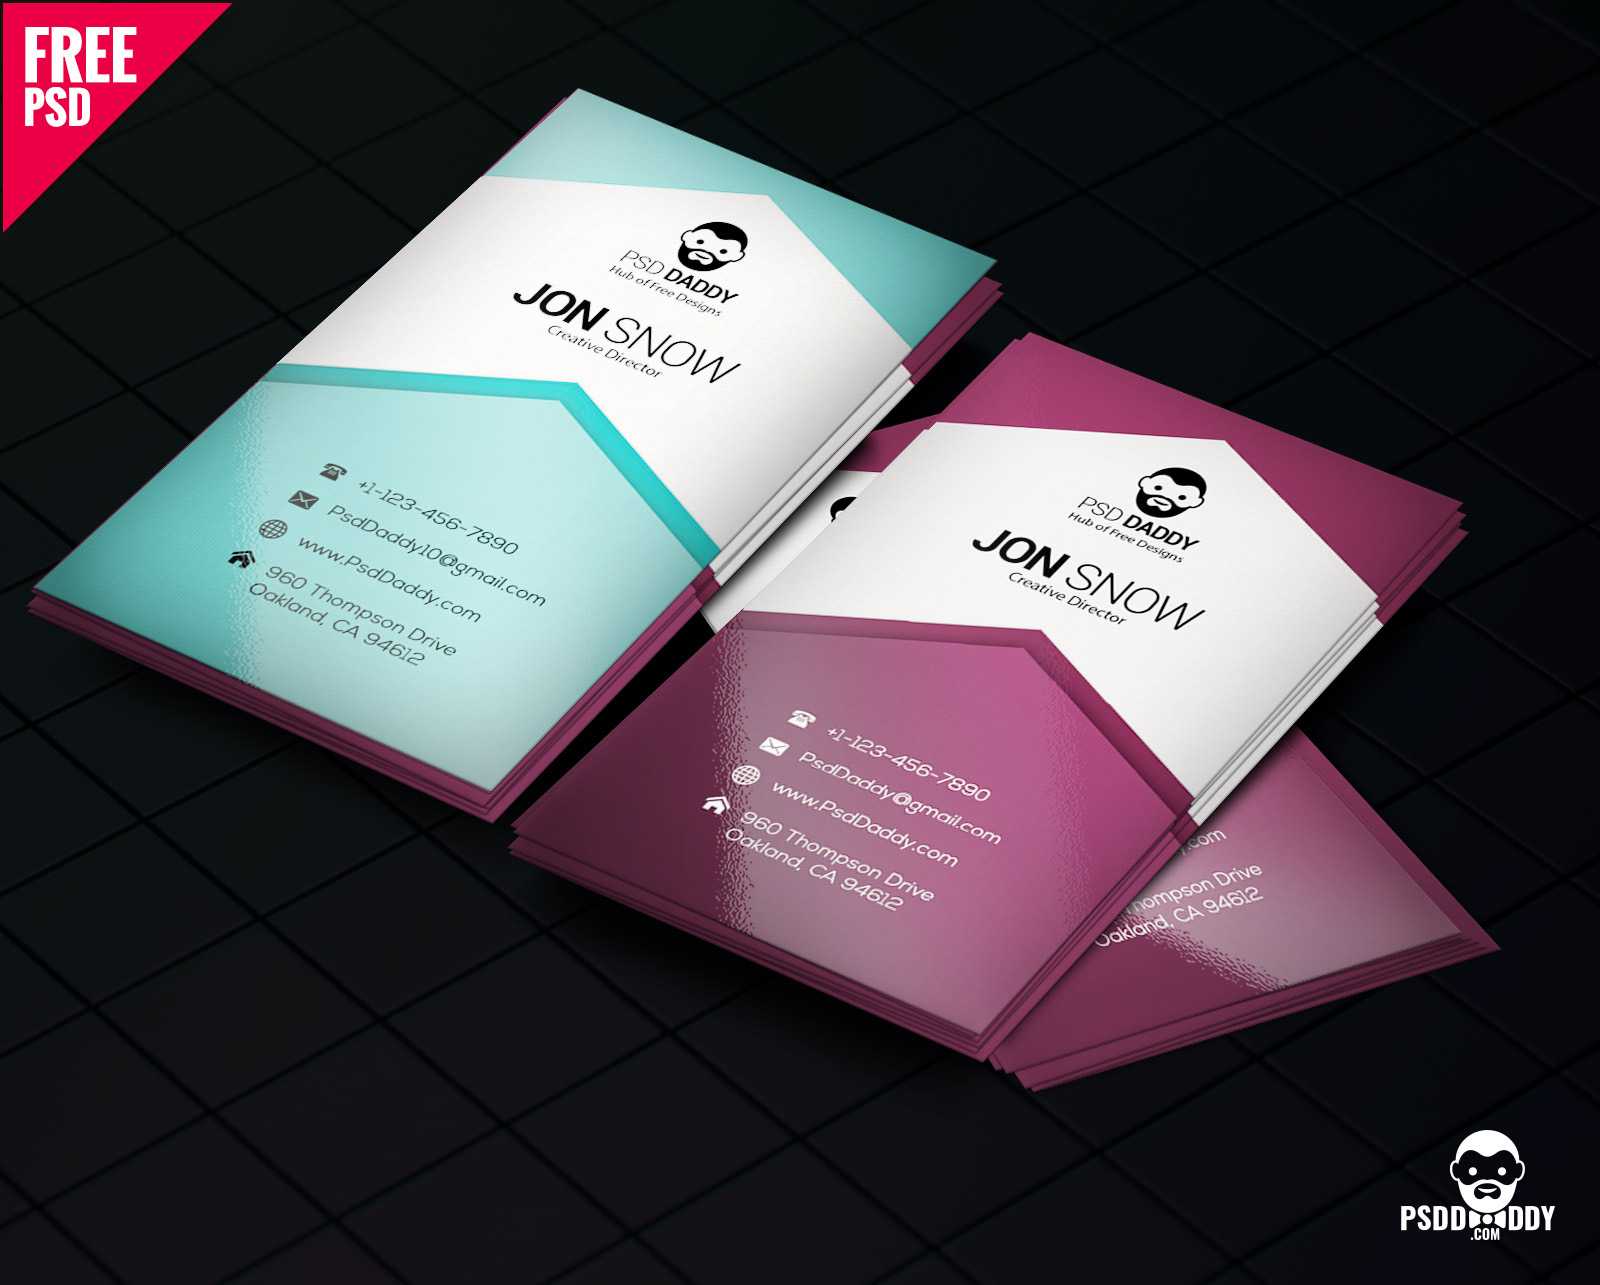 Download]Creative Business Card Psd Free | Psddaddy Intended For Template Name Card Psd